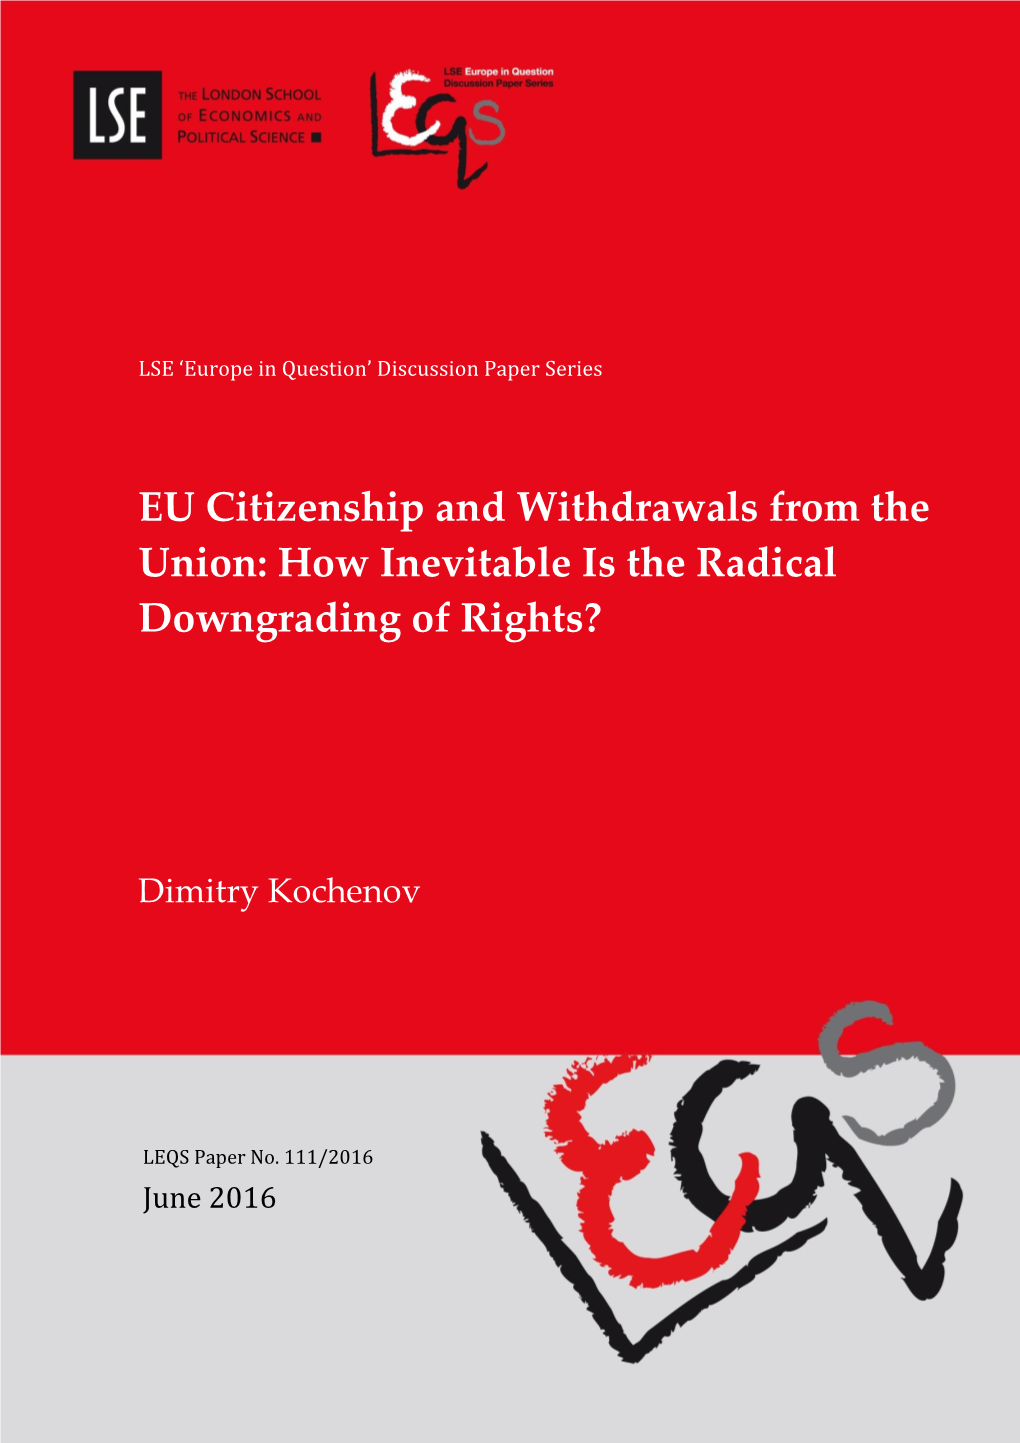 EU Citizenship and Withdrawals from the Union: How Inevitable Is the Radical Downgrading of Rights?